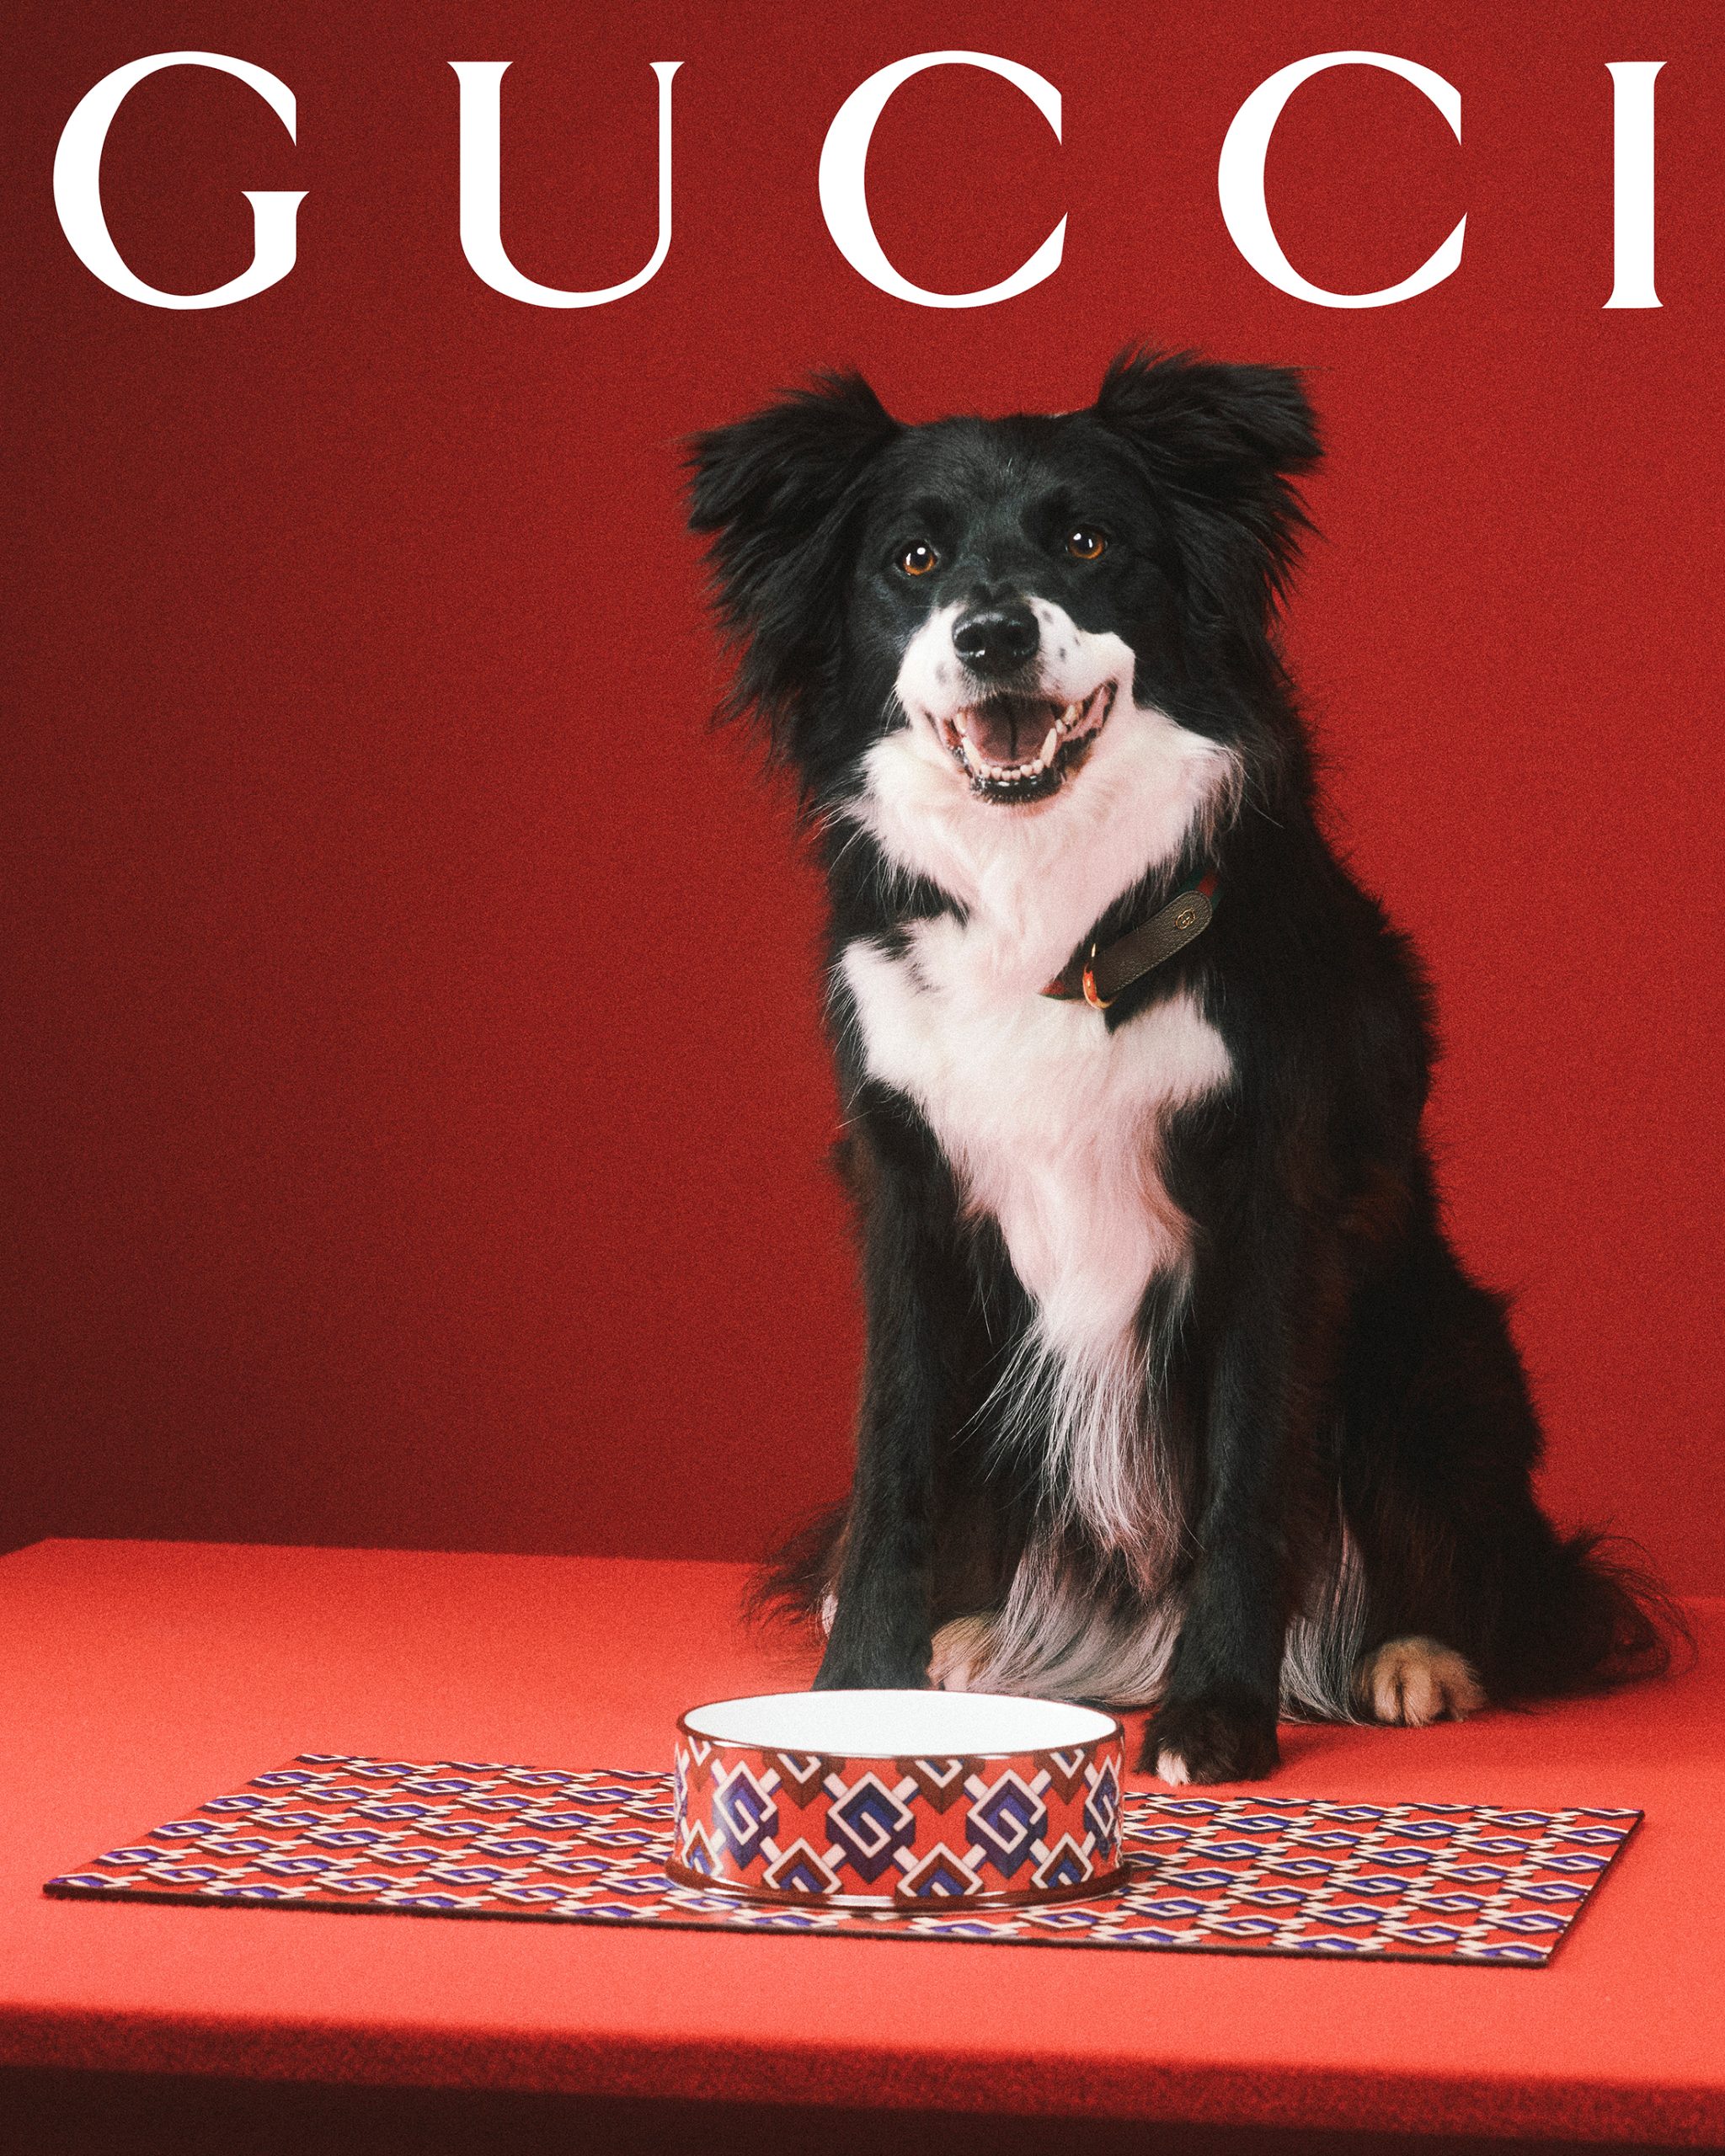 Gucci - The Gucci Pet Collection continues the narrative